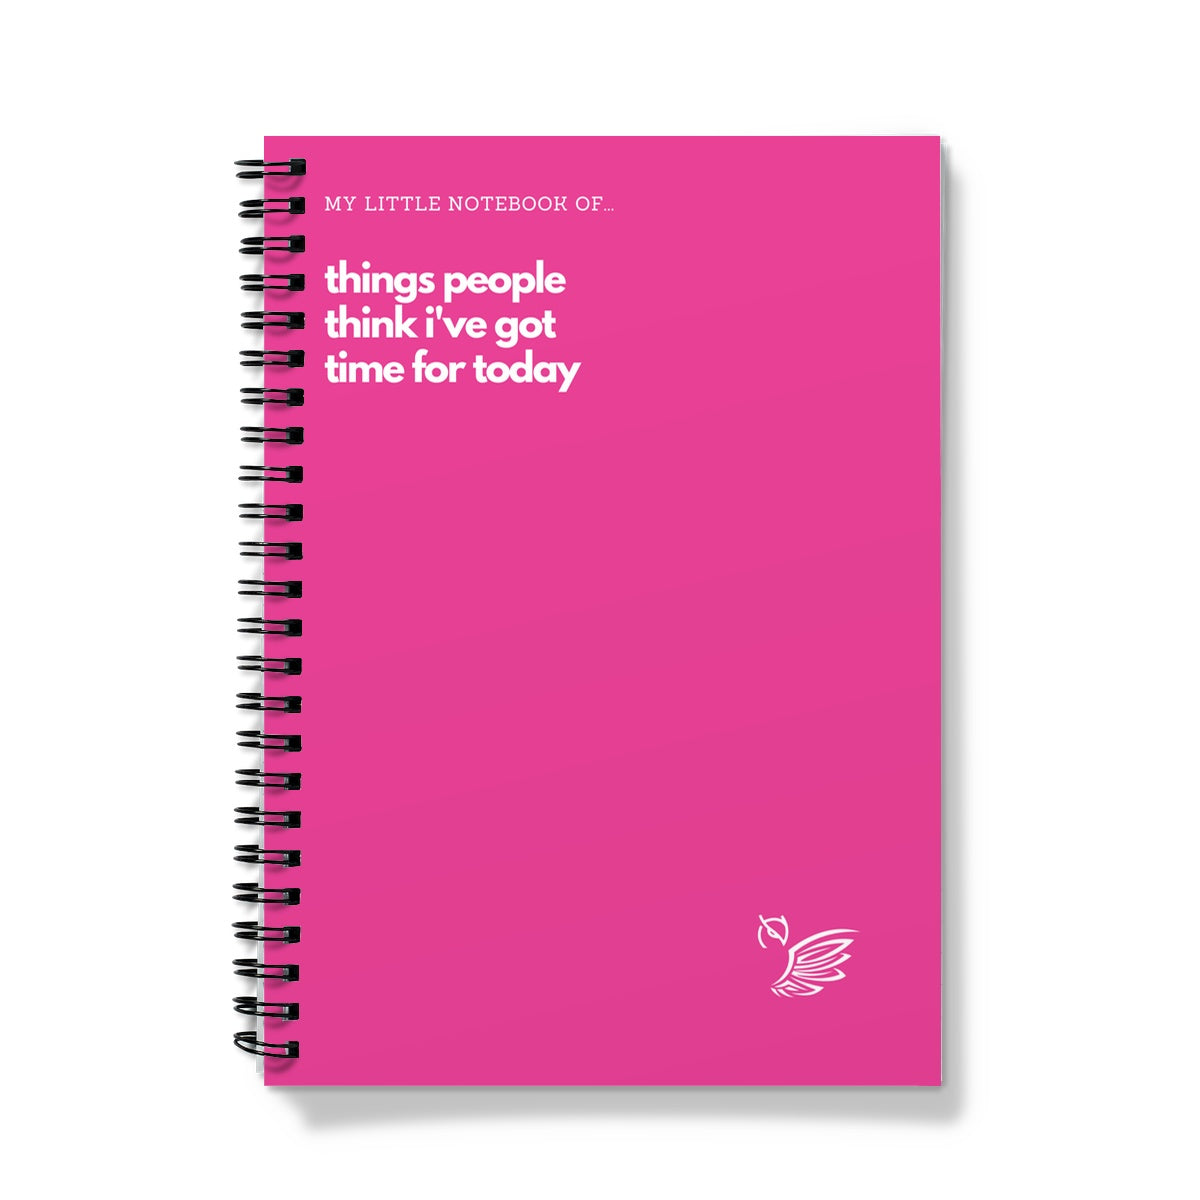 My Little Notebook Of... Things People Think I've Got Time For Today - Pink Edition Notebook